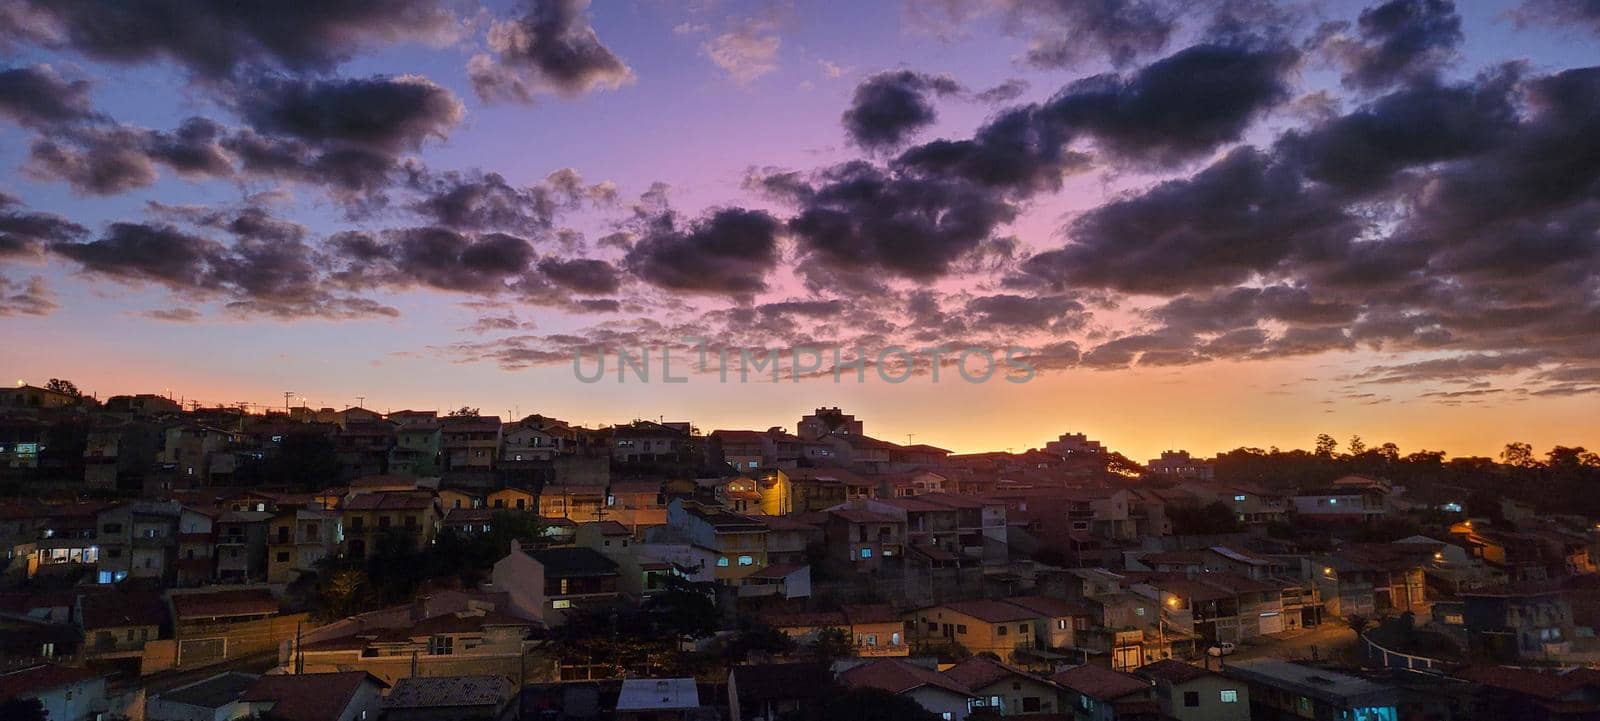 image of sky in the late afternoon in Brazil by sarsa